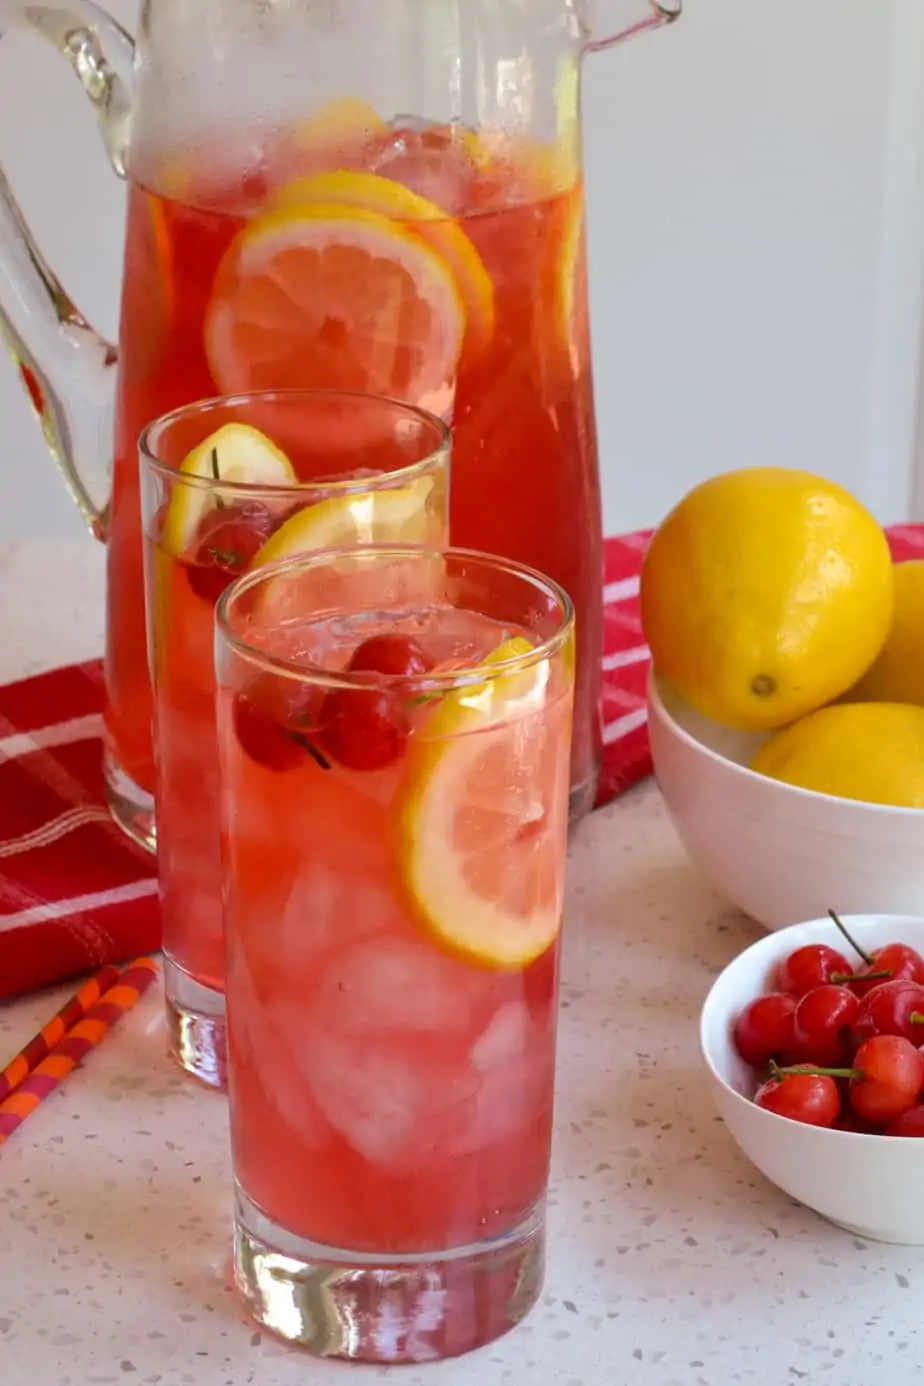 An easy fresh Cherry Lemonade recipe made from sour cherries and fresh lemons.  This refreshing beverage is perfect for all your summer barbecues and picnics.